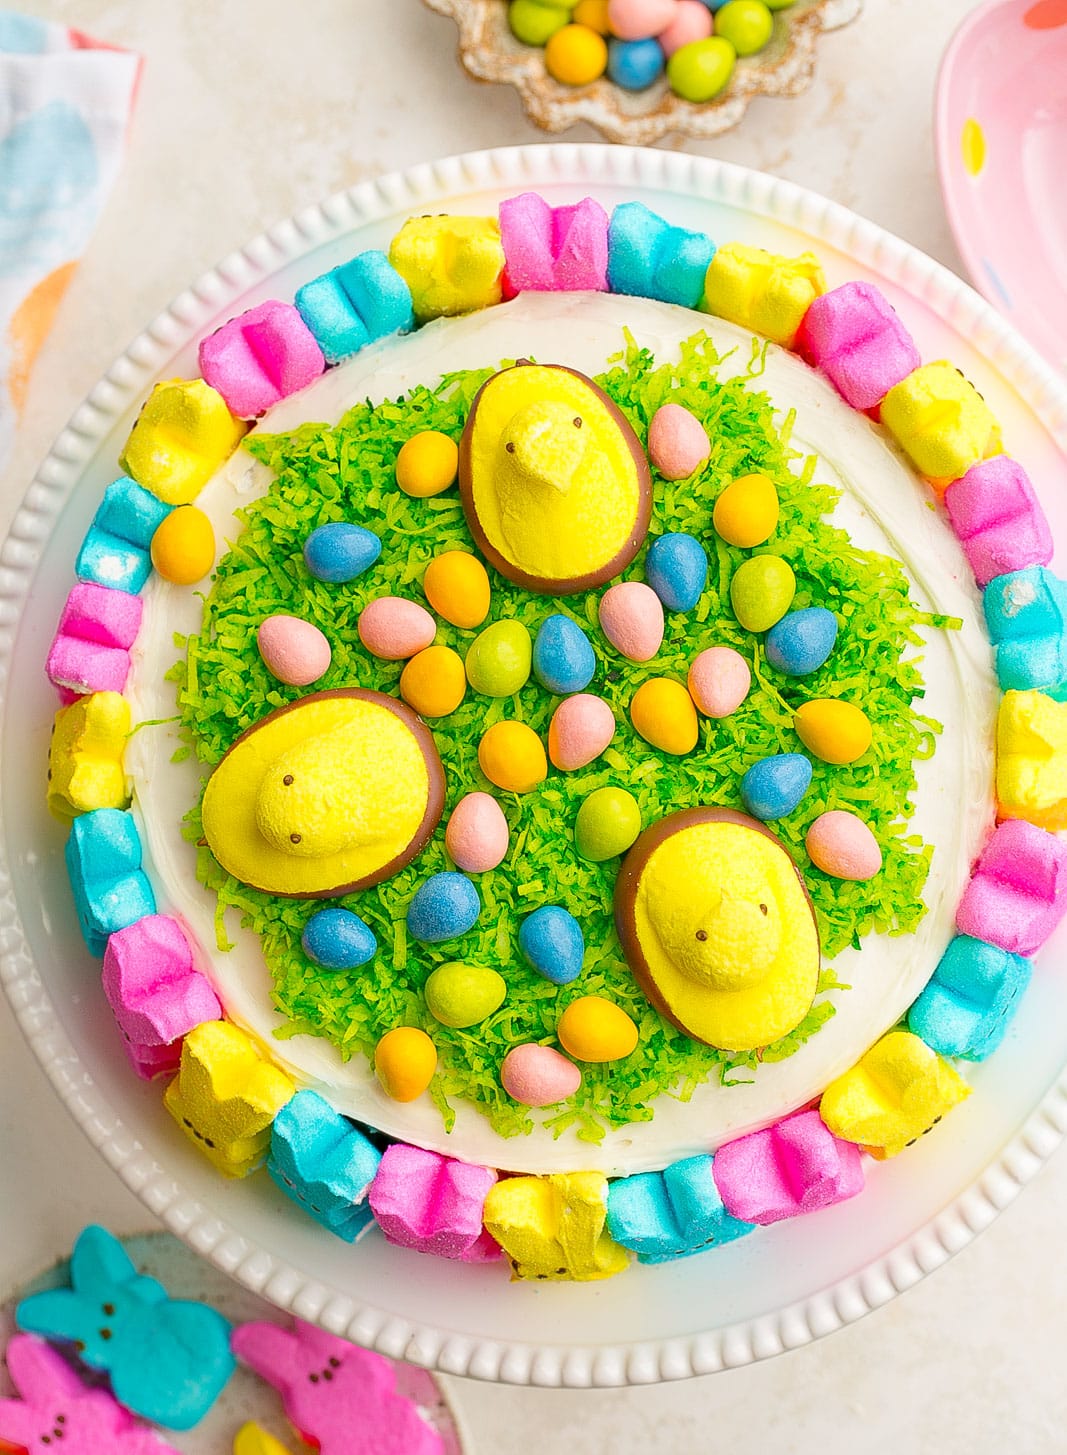 15 Easter Baking Ideas - The Cake Decorating Co. | BlogThe Cake Decorating  Co. | Blog